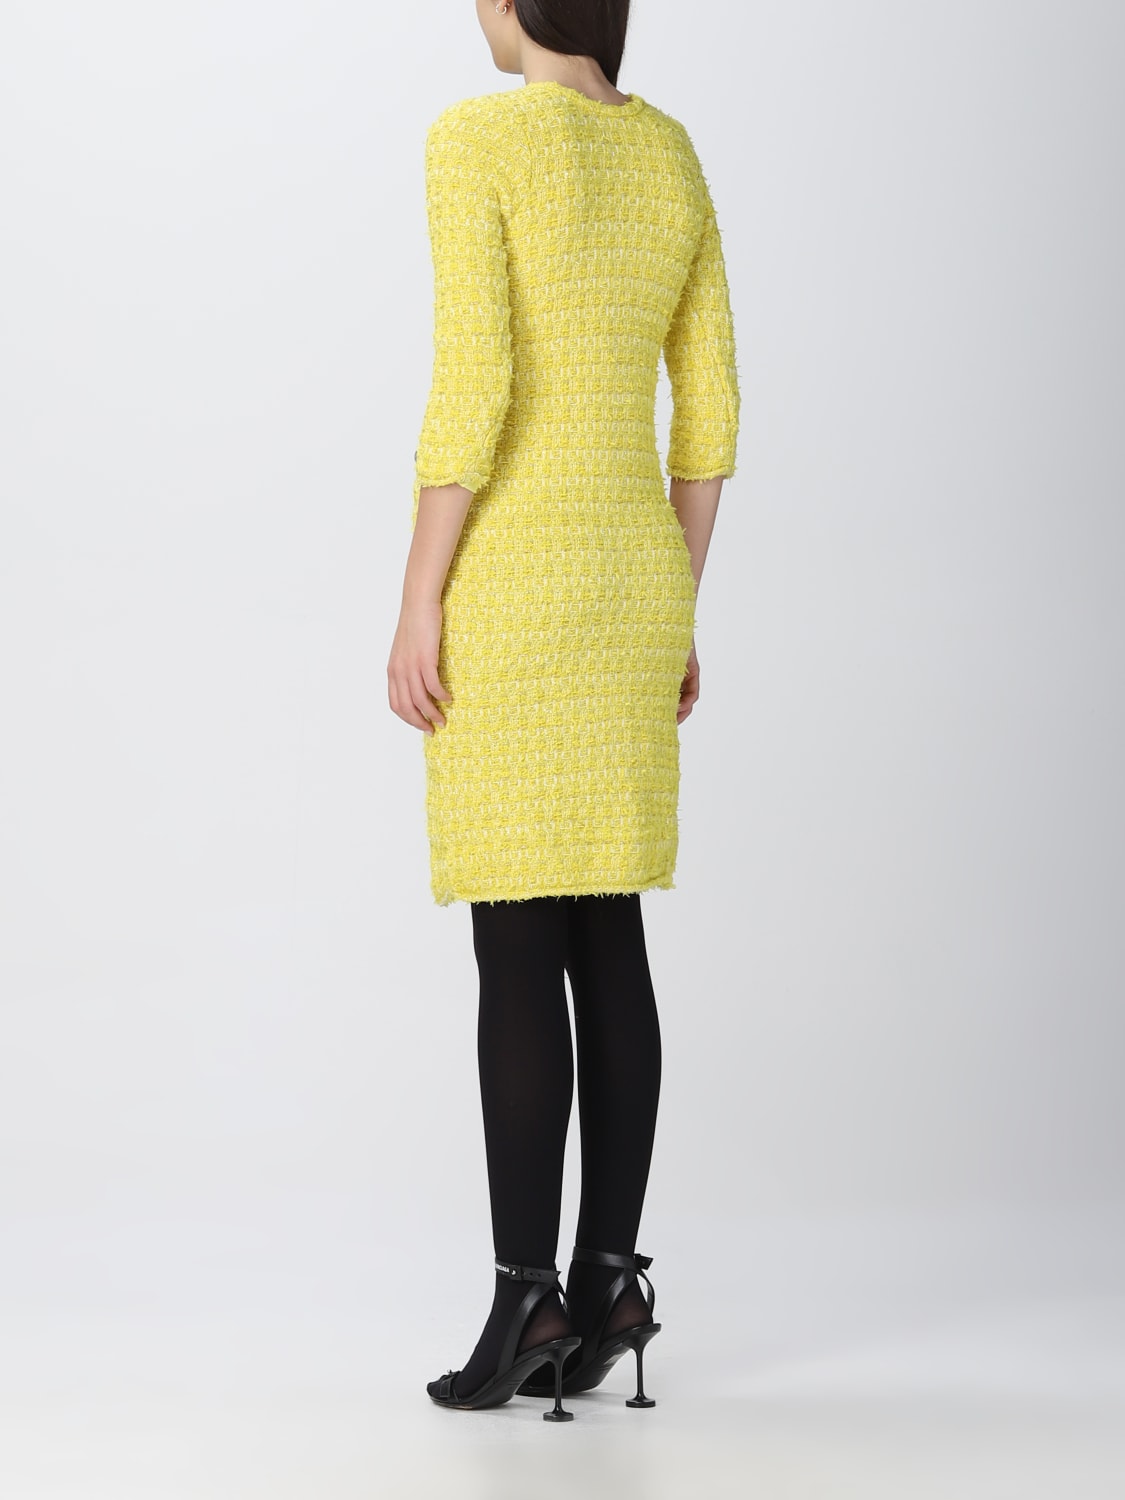 klart Magnetisk patologisk Balenciaga Outlet: wool tweed knit dress - Yellow | Balenciaga dress  704556T1650 online at GIGLIO.COM